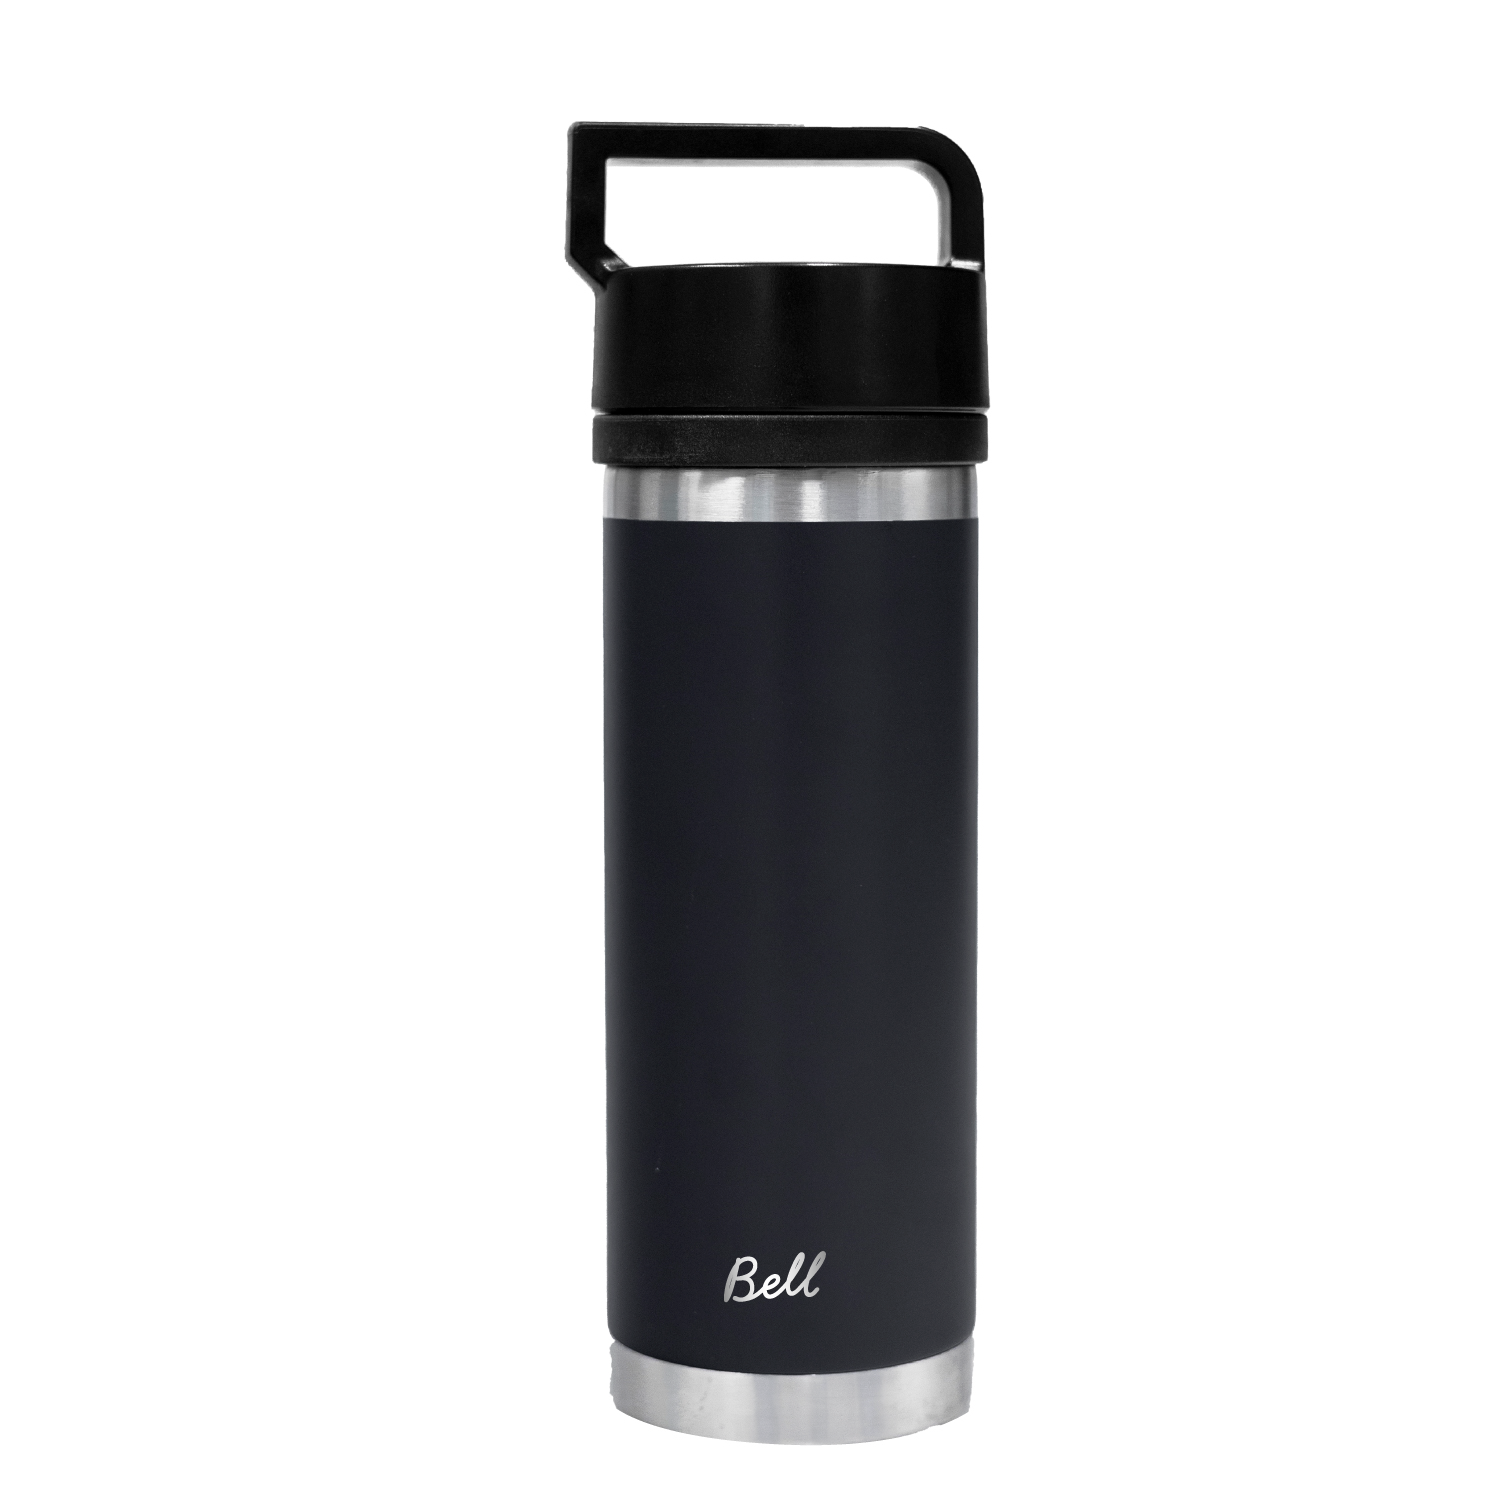 Bell Stainless Steel - Solid Handle - 532ml (18oz)